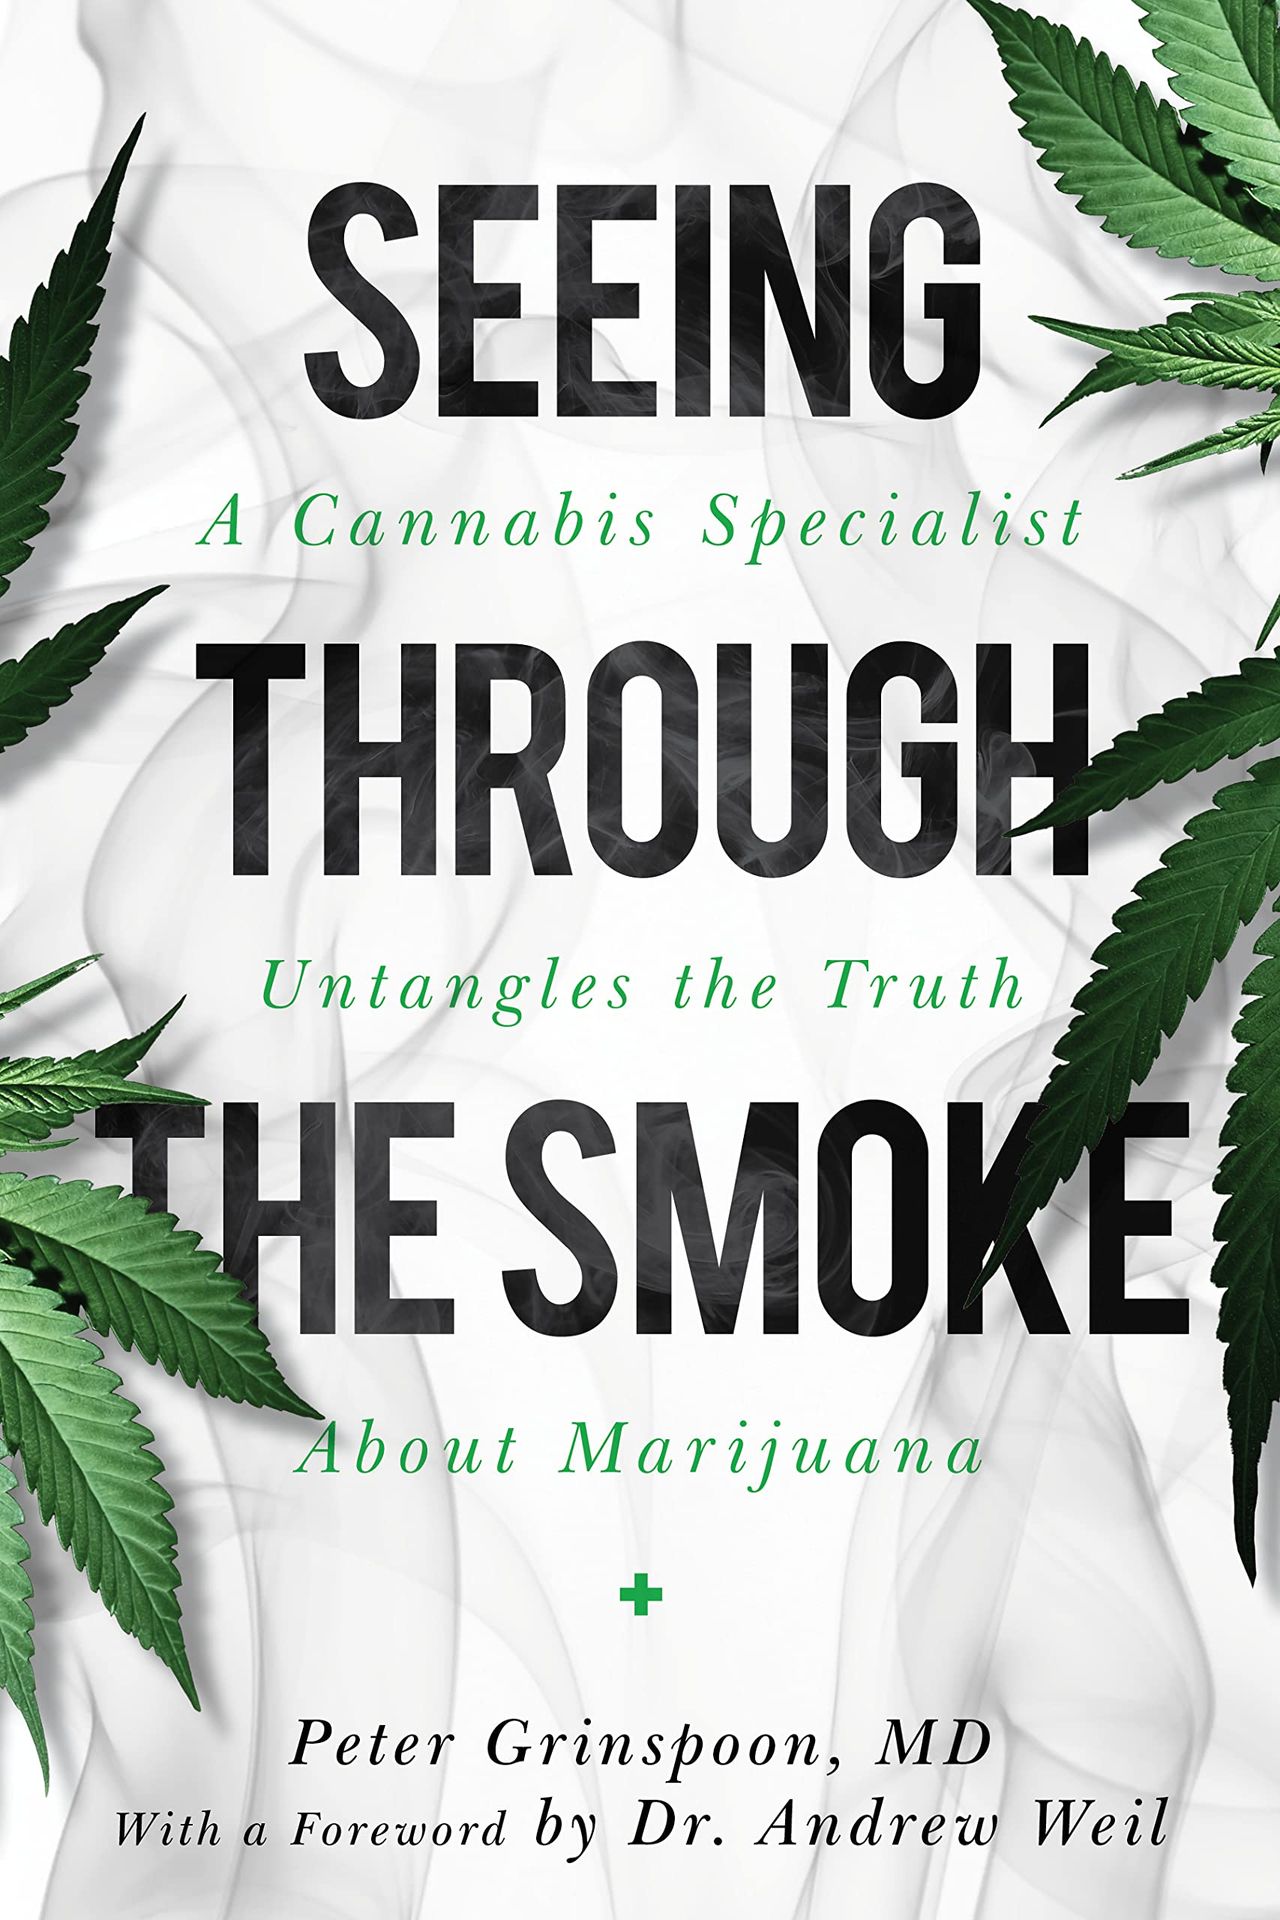 Seeing through the smoke by Dr. Peter Grinspoon. Cannabis Center of Excellence Scientific Advisor.